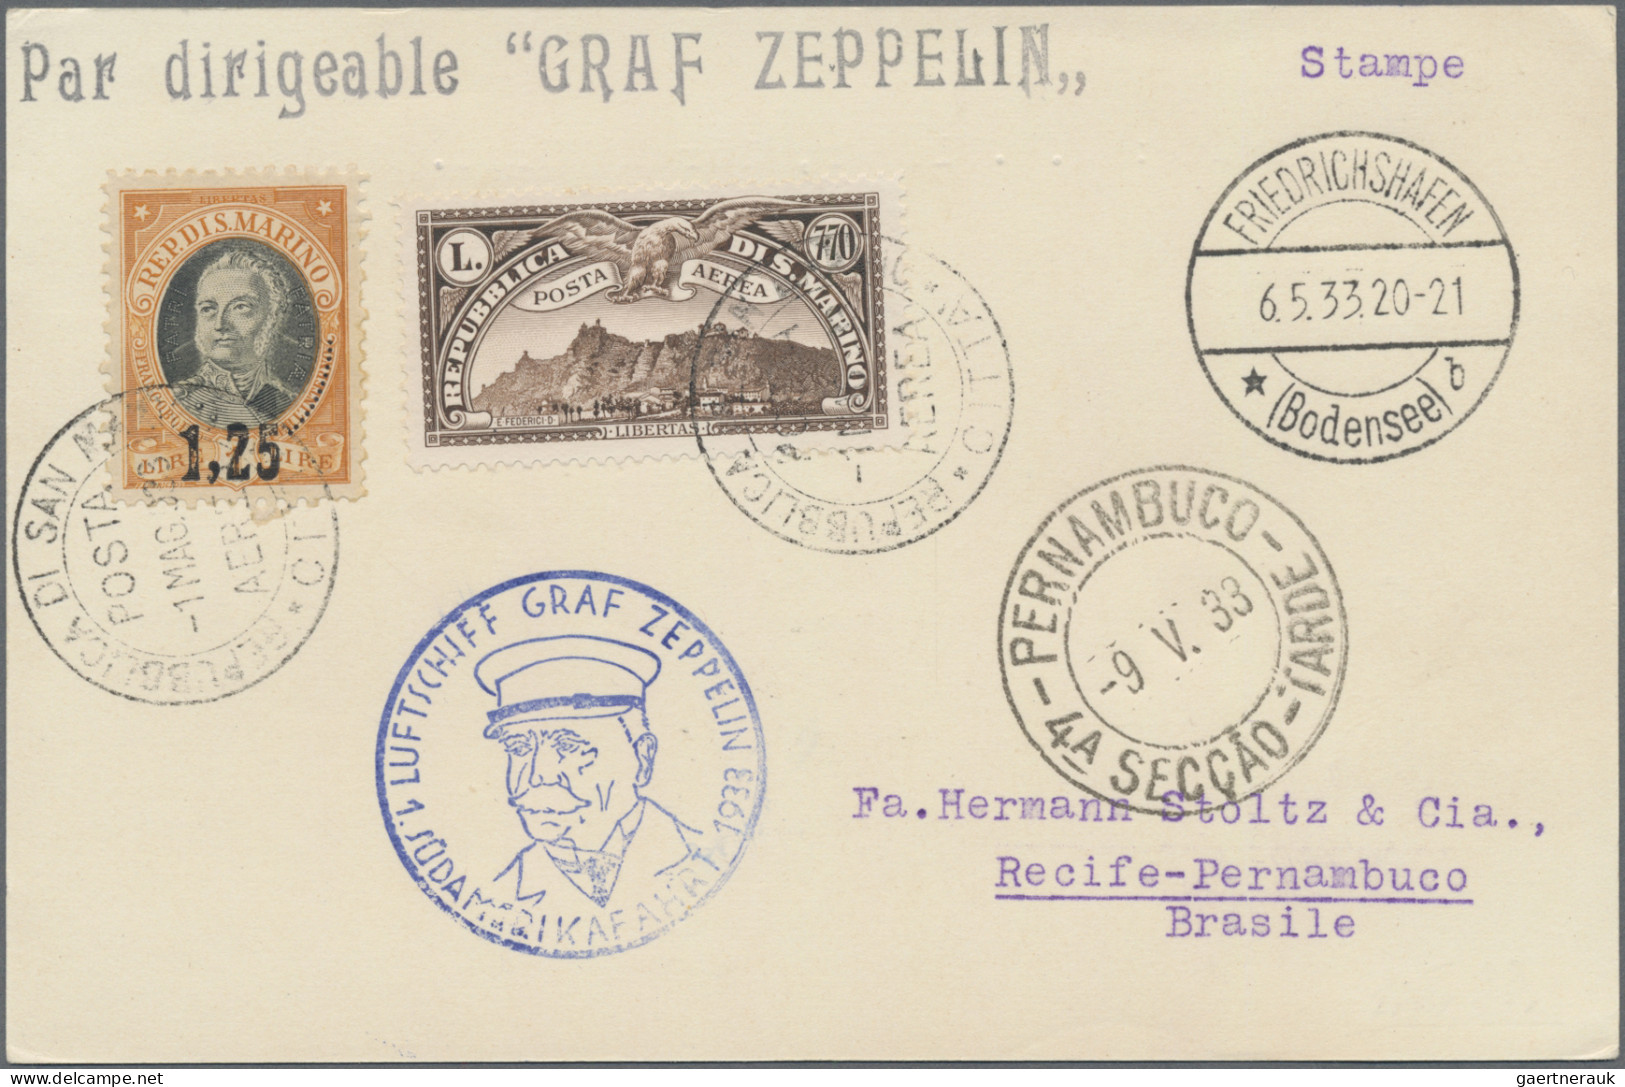 Zeppelin Mail - Europe: 1933, San Marino, 1st South America Flight, Card Franked - Europe (Other)